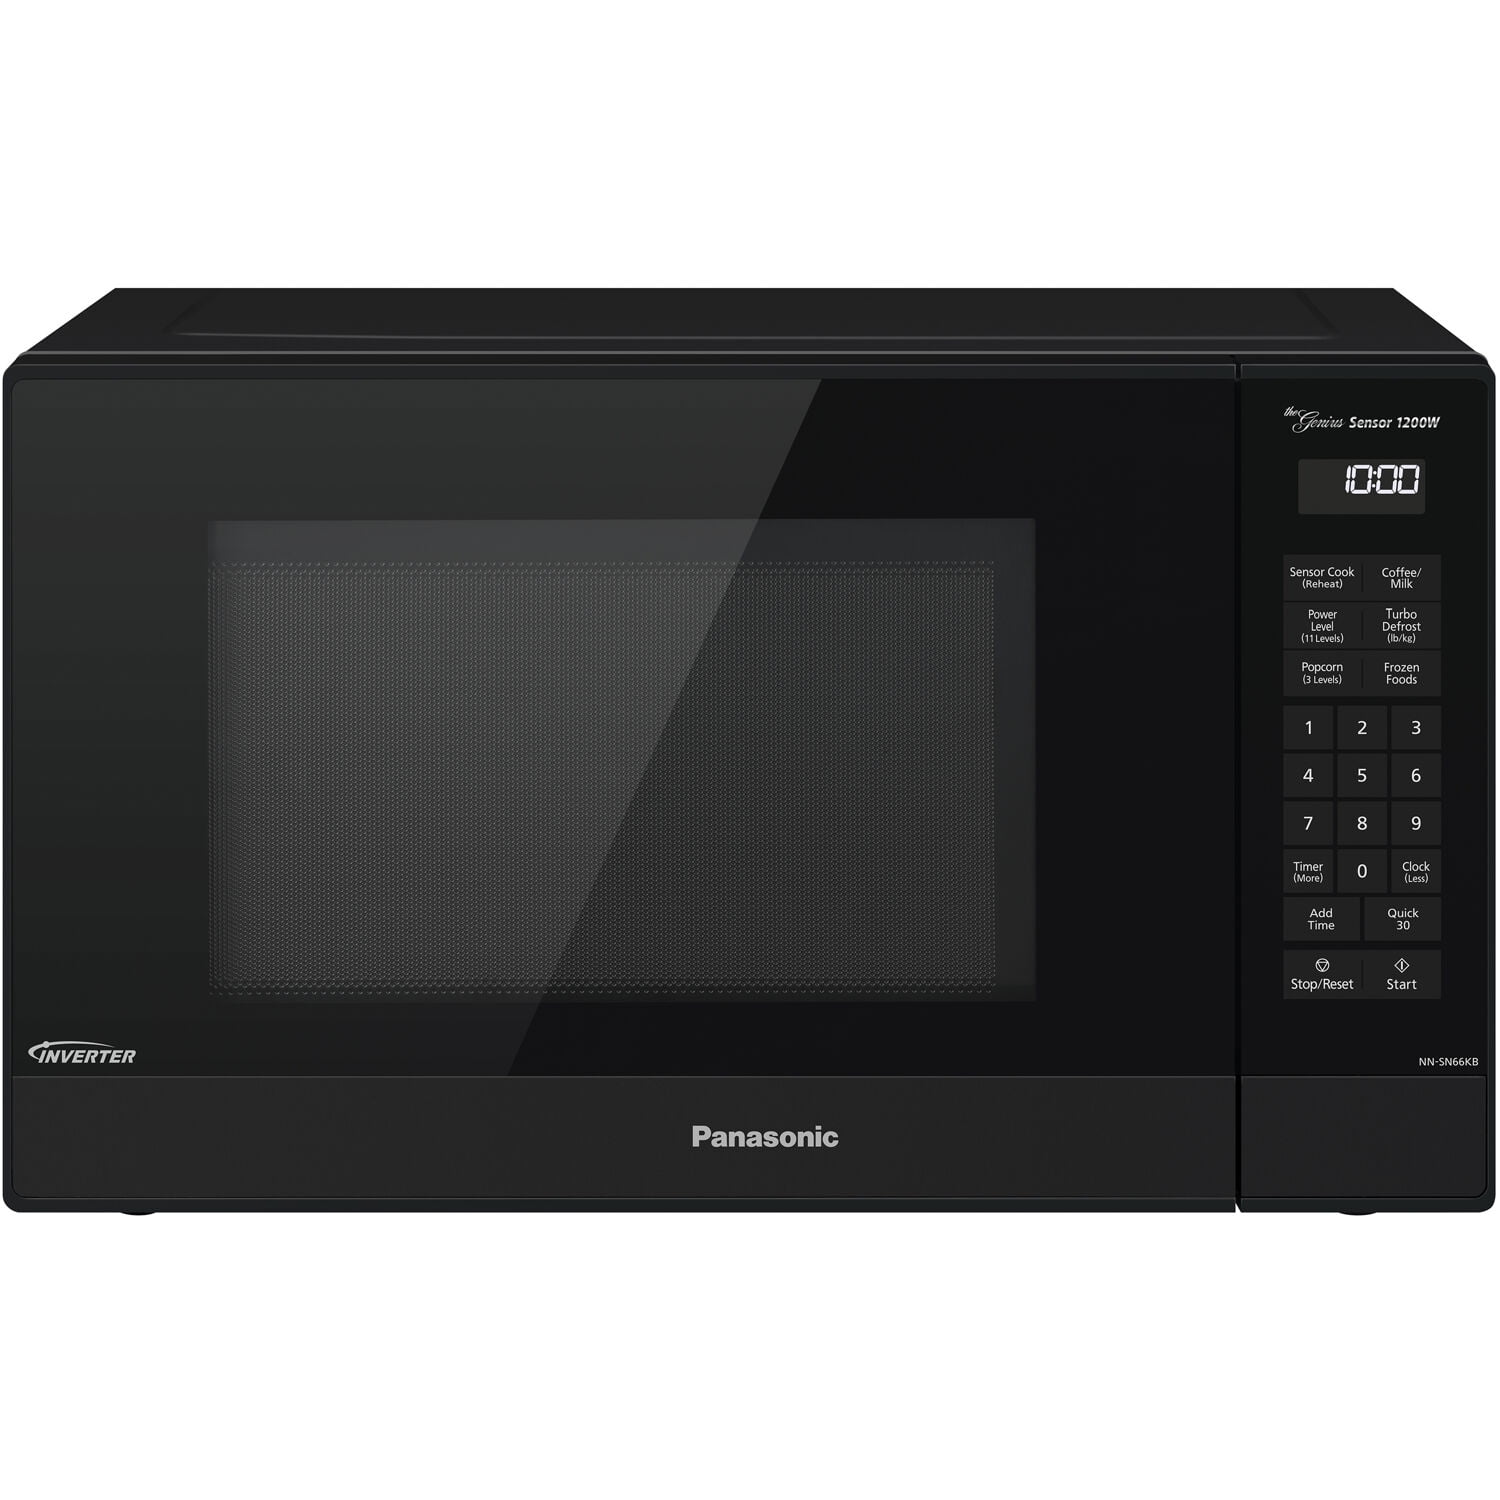 Nn-sn66kb 1.2 Cu. Ft. Microwave Oven With Cyclonic Wave Inventer, Black